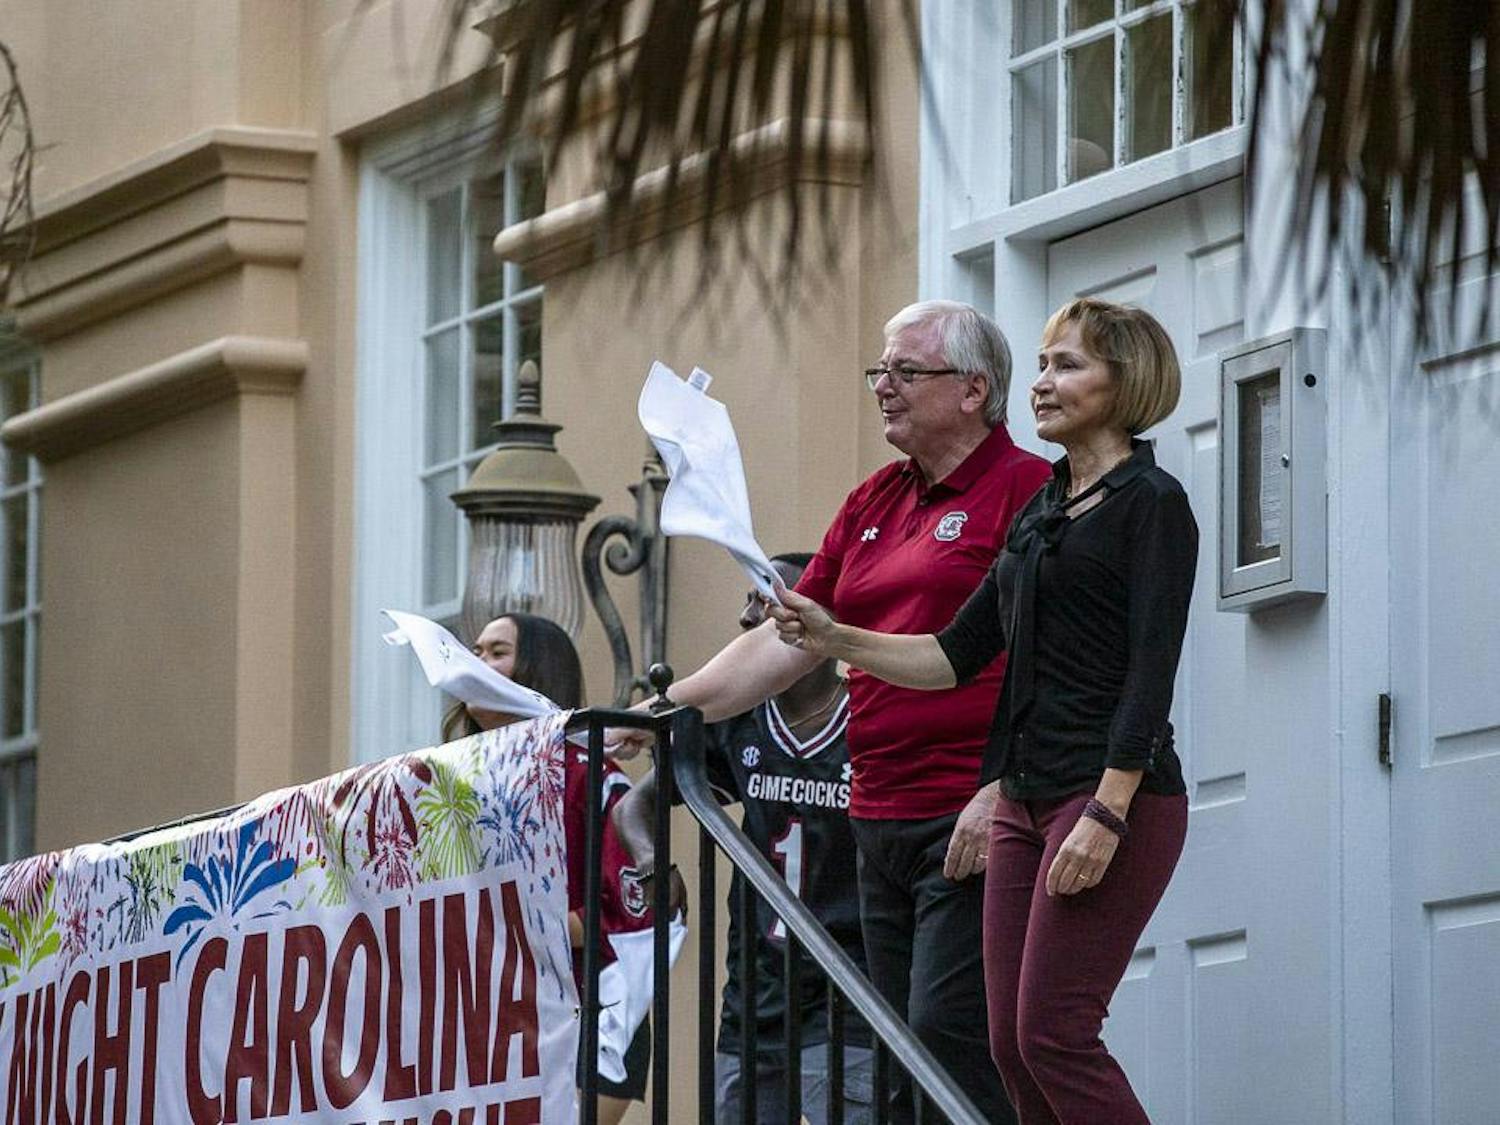 USC President Michael Amiridis (left) and his wife Ero Aggelopoulou-Amiridis (right) throw up their ralley towels during the playing of "Sandstorm" at the First Night Carolina event on Aug. 23, 2023. President Amiridis and head football coach Shane Beamer gave speeches during the event.